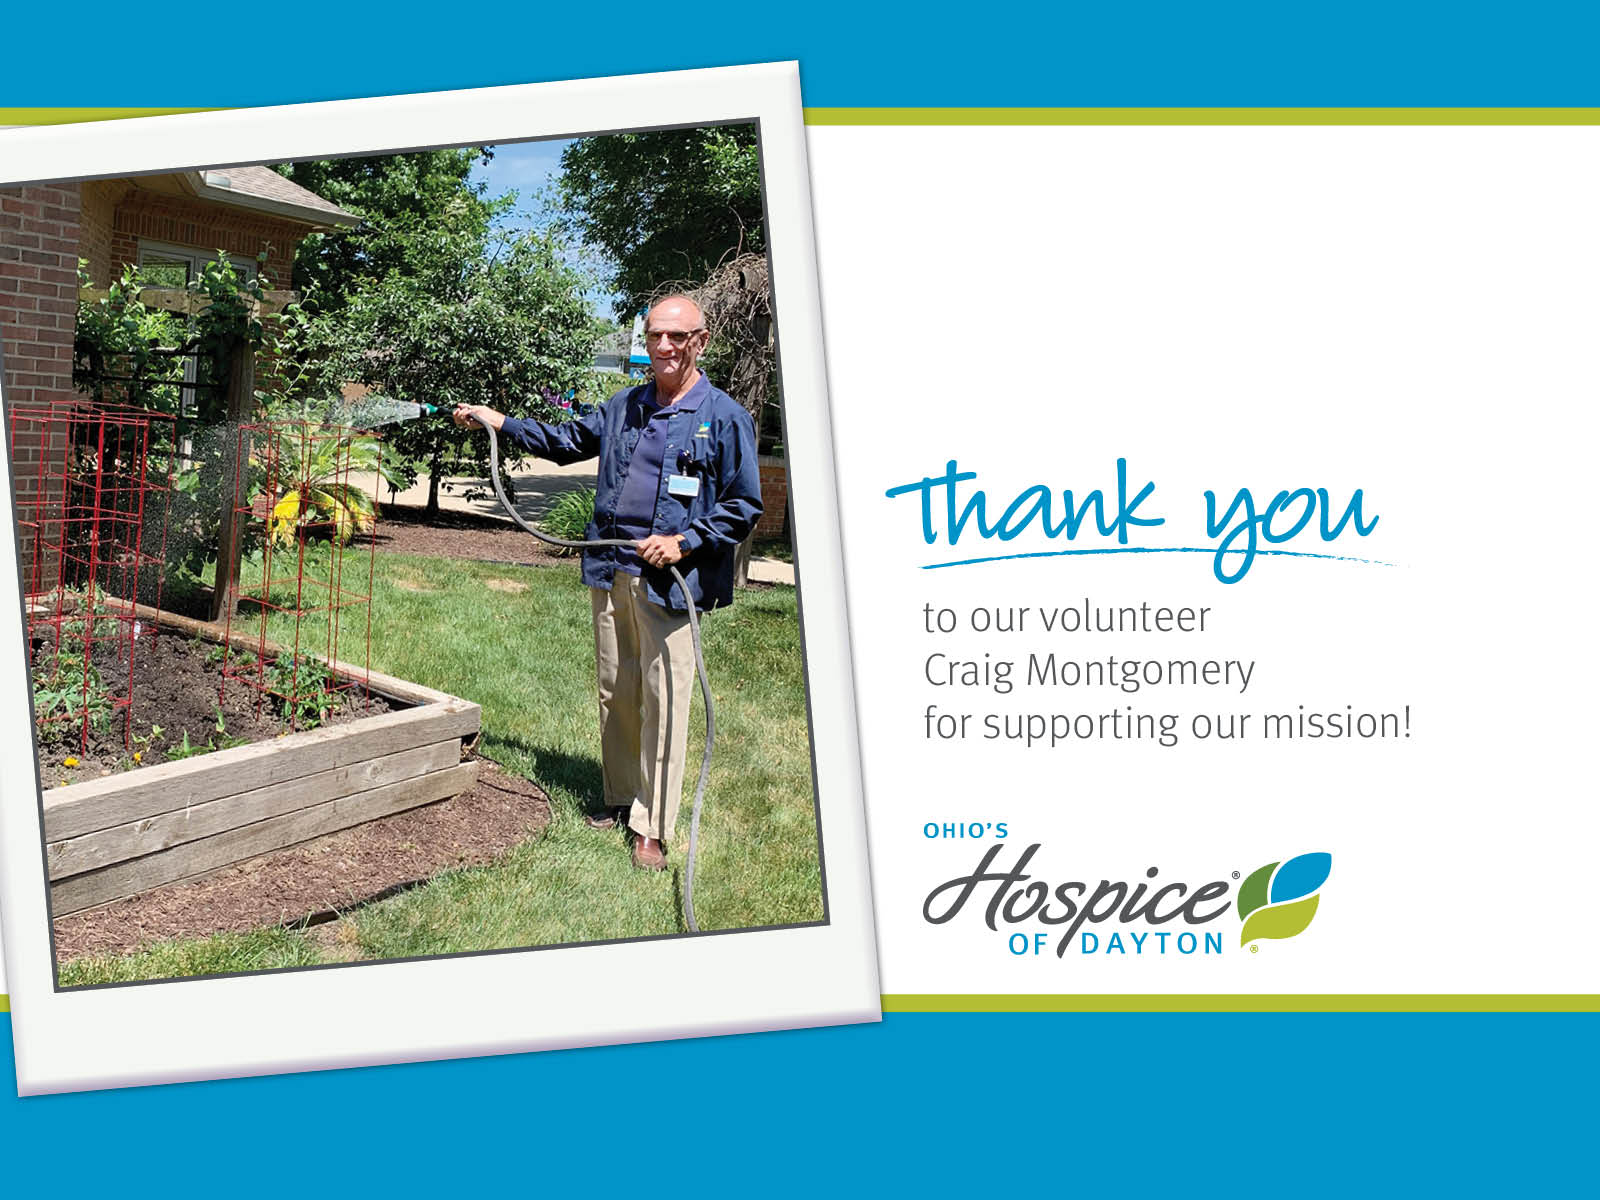 Thank you to our volunteer Craig Montgomery for supporting our mission! Ohio's Hospice of Dayton